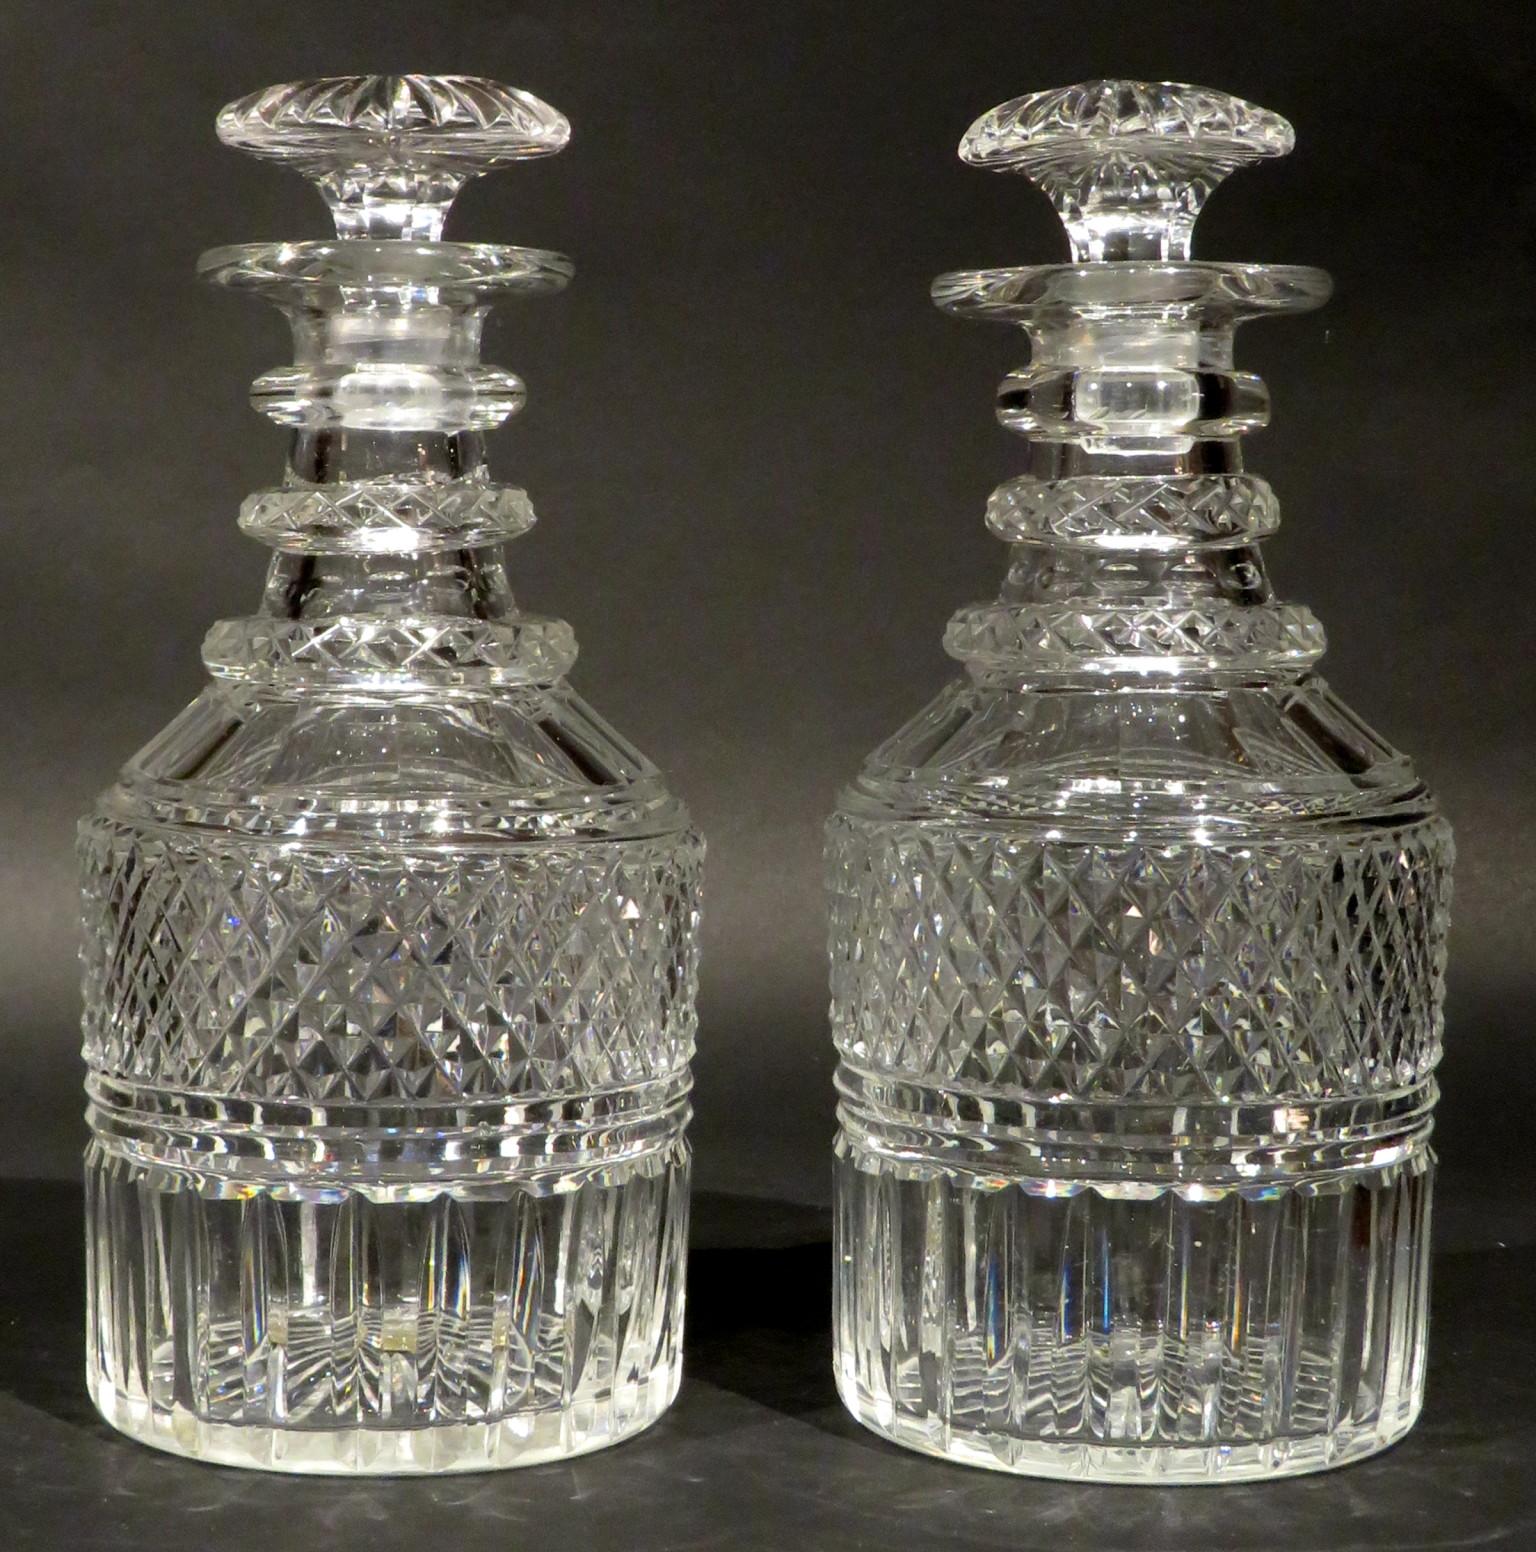 Both barrel shaped bodies showing triple ringed necks - two with facet cut detail, above shoulders decorated with broad cut flutes, over a wide band of cross-cut diamond & mitre cut vertical flutes, their undersides showing starburst cut motifs, one